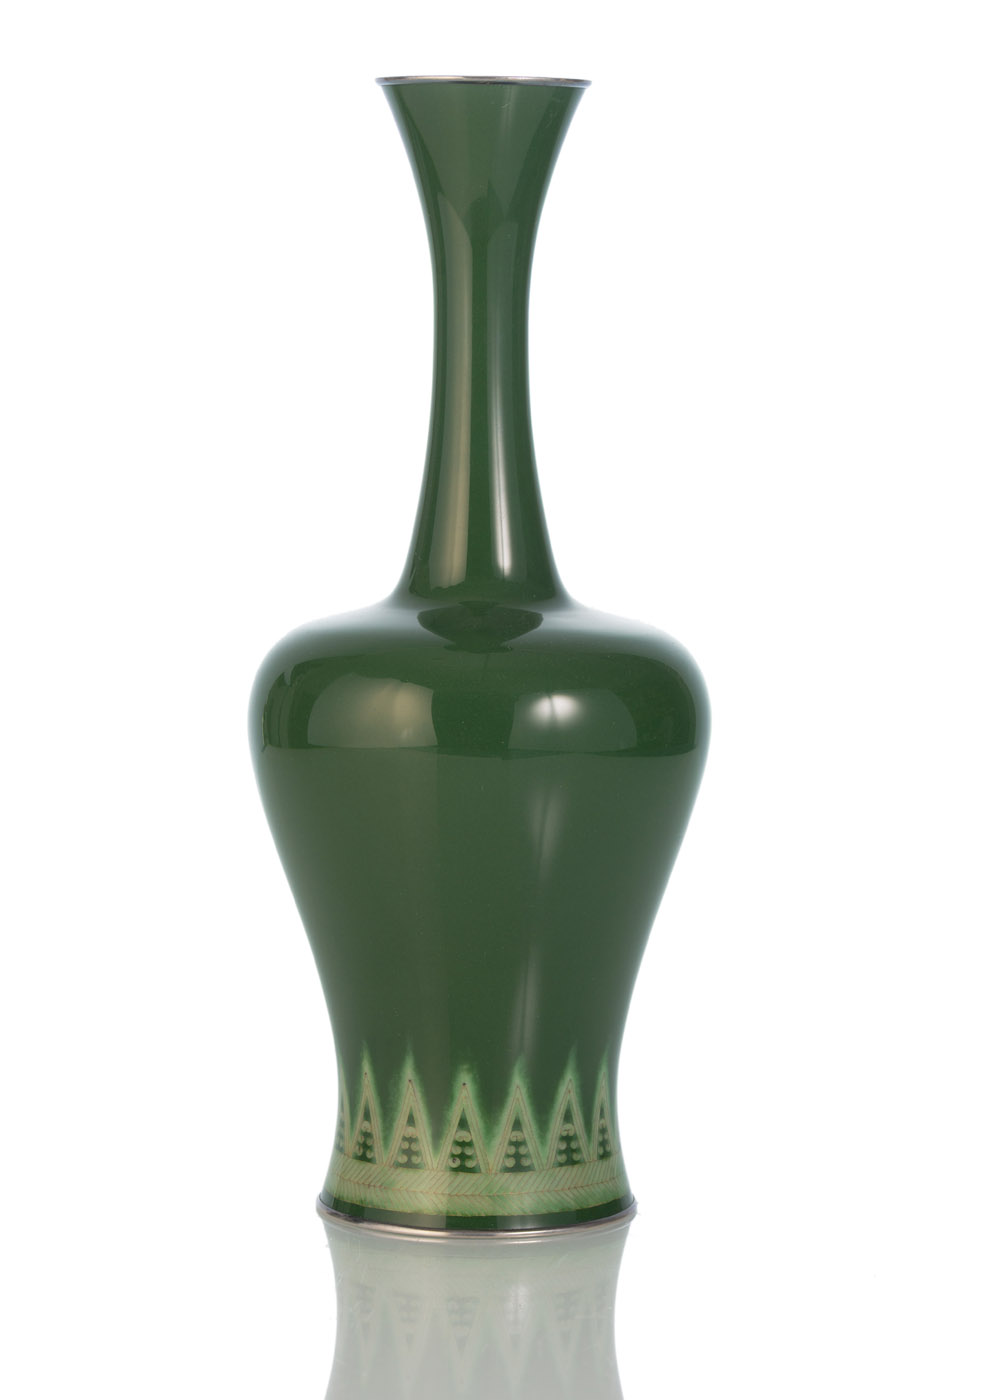 A GREEN CLOISONNÉ ENAMEL VASE WITH SILVER WIRES AND GEOMETRICAL DECORATION ABOVE THE STAND